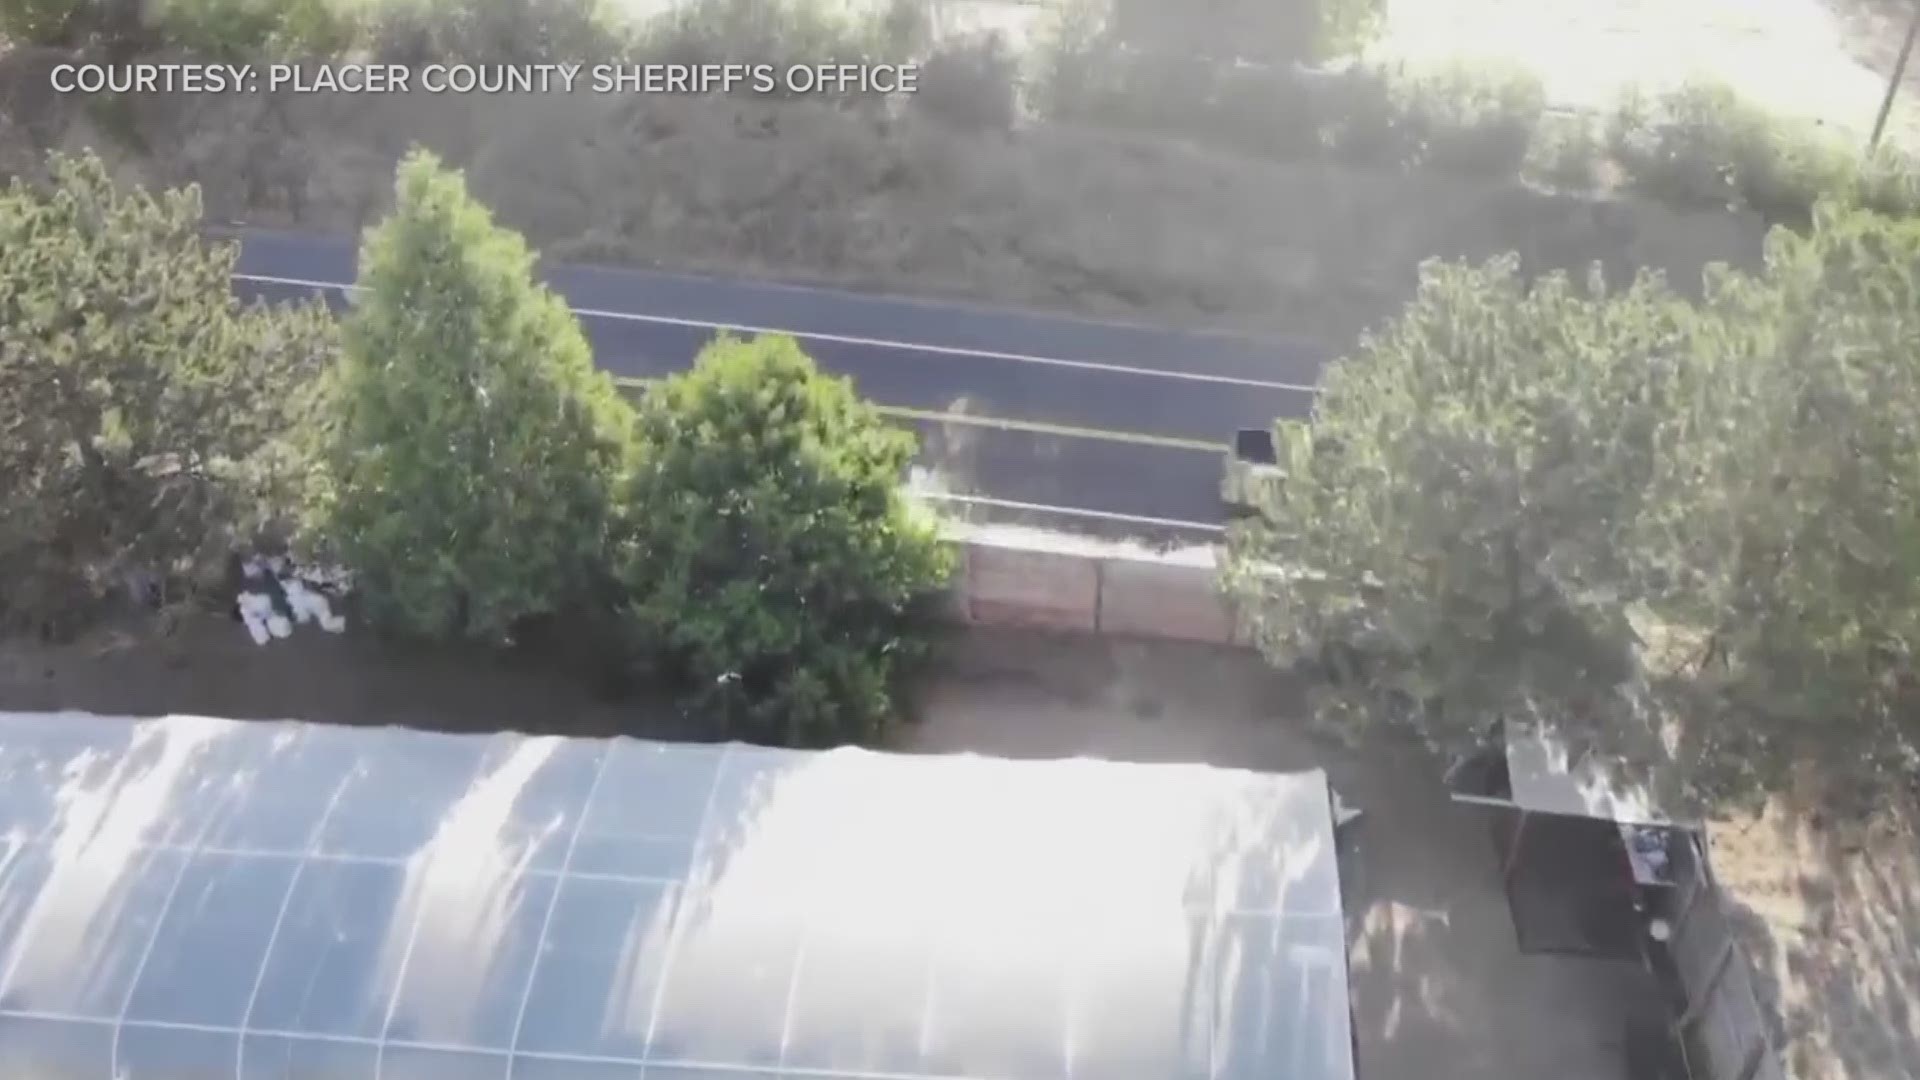 The Placer County Sheriff's Office released aerial footage from a large marijuana bust on Oct. 30, 2019.